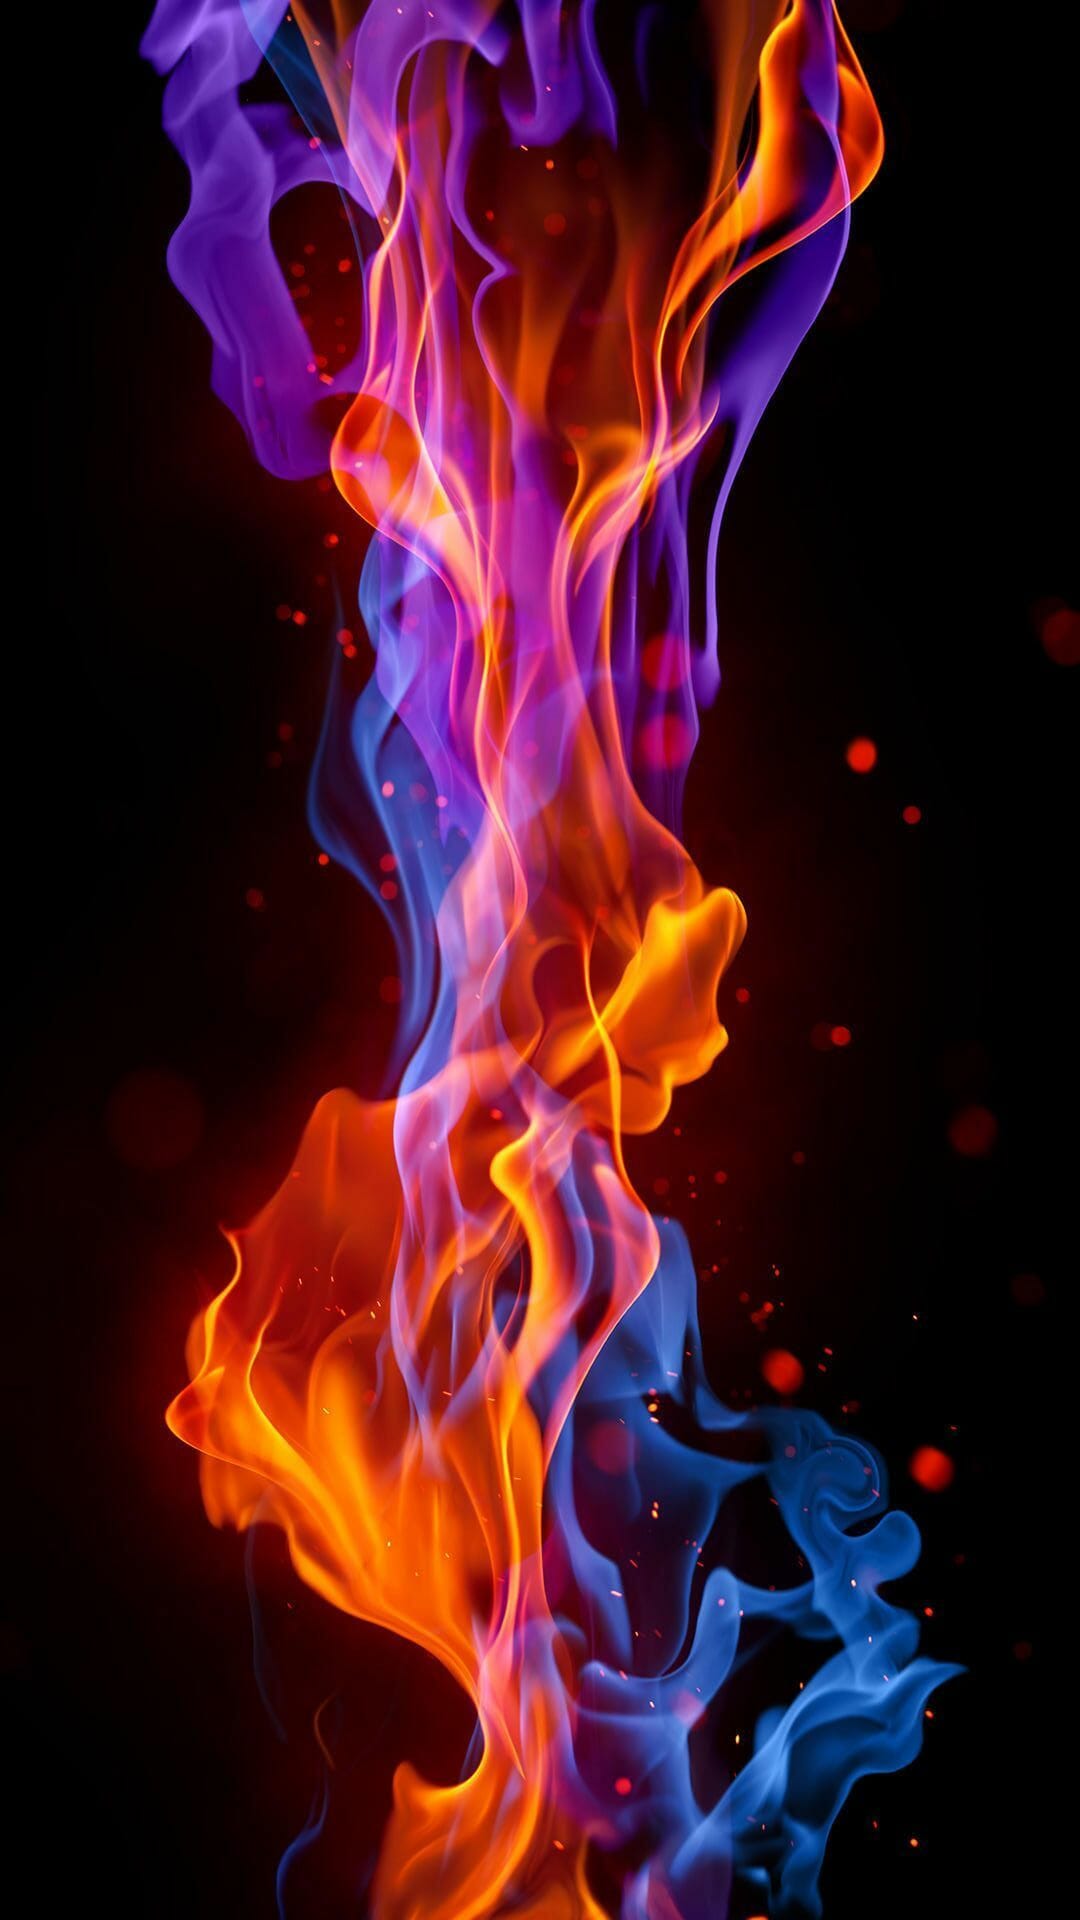 Aesthetic Fire HD Wallpaper (Desktop Background / Android / iPhone) (1080p, 4k) (1080x1920) (2022)